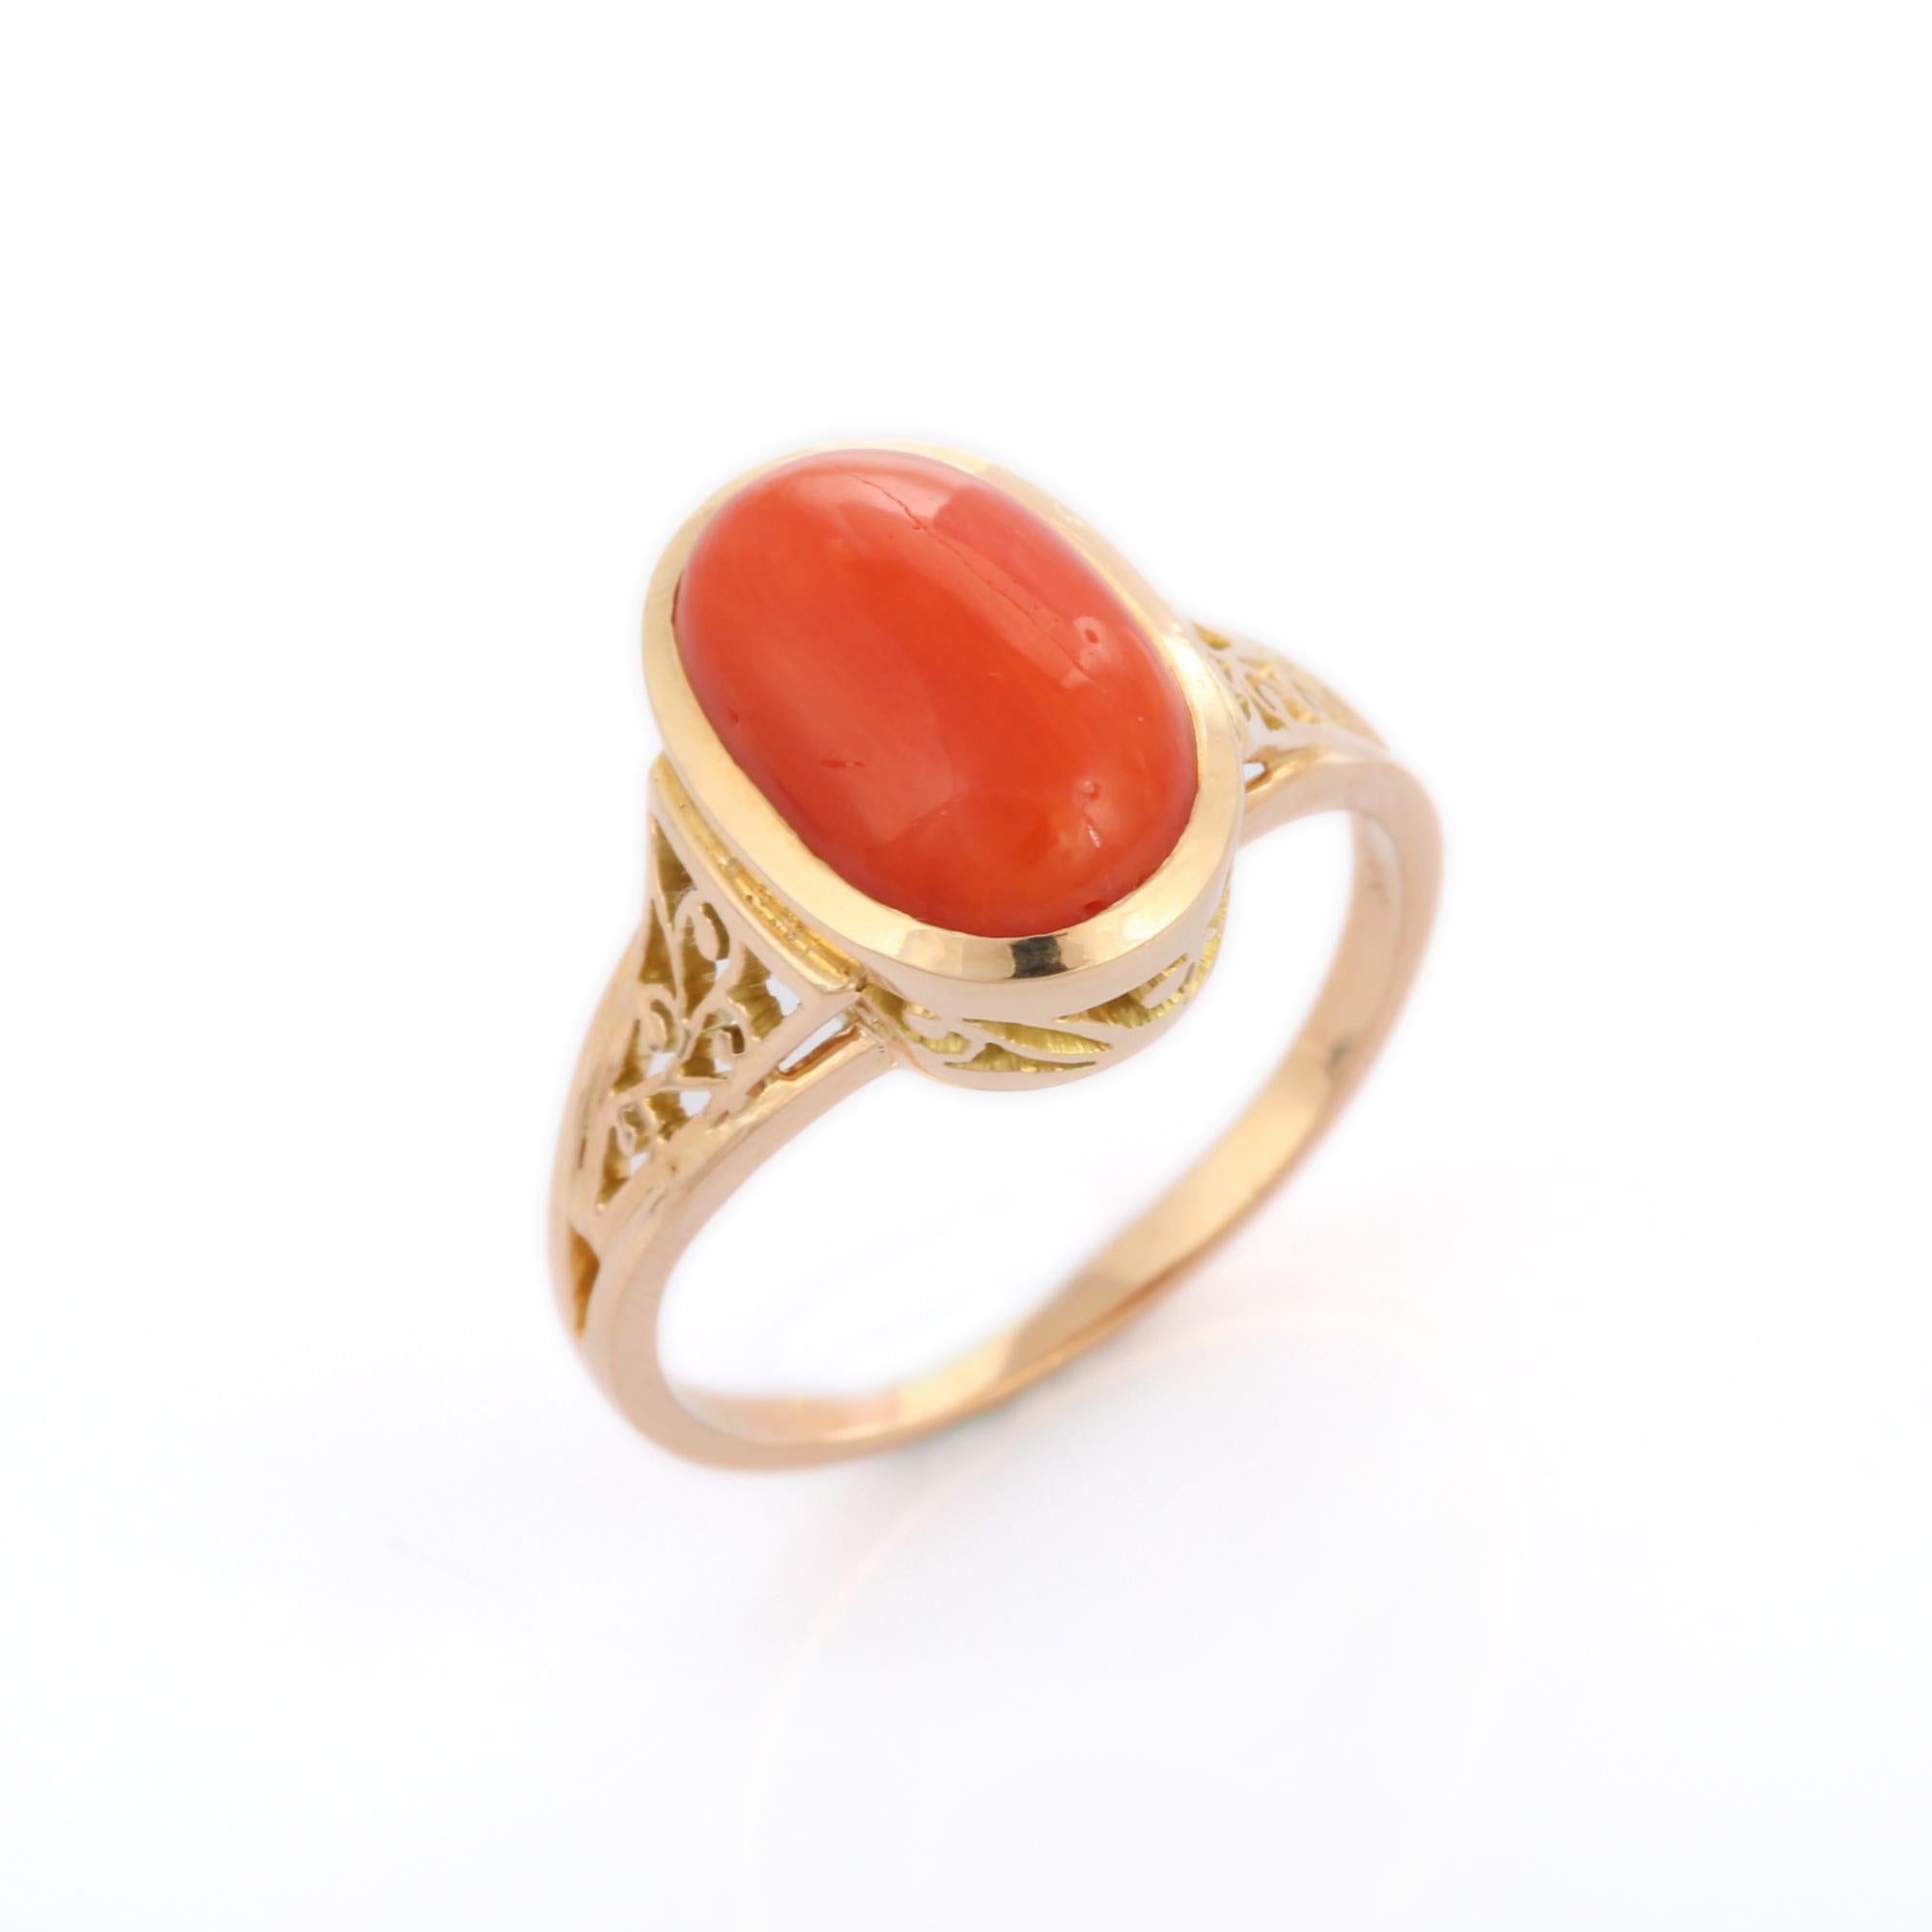 For Sale:  Anglo Indian Style 14K Yellow Gold 4.96 Carat Coral Cocktail Ring 5